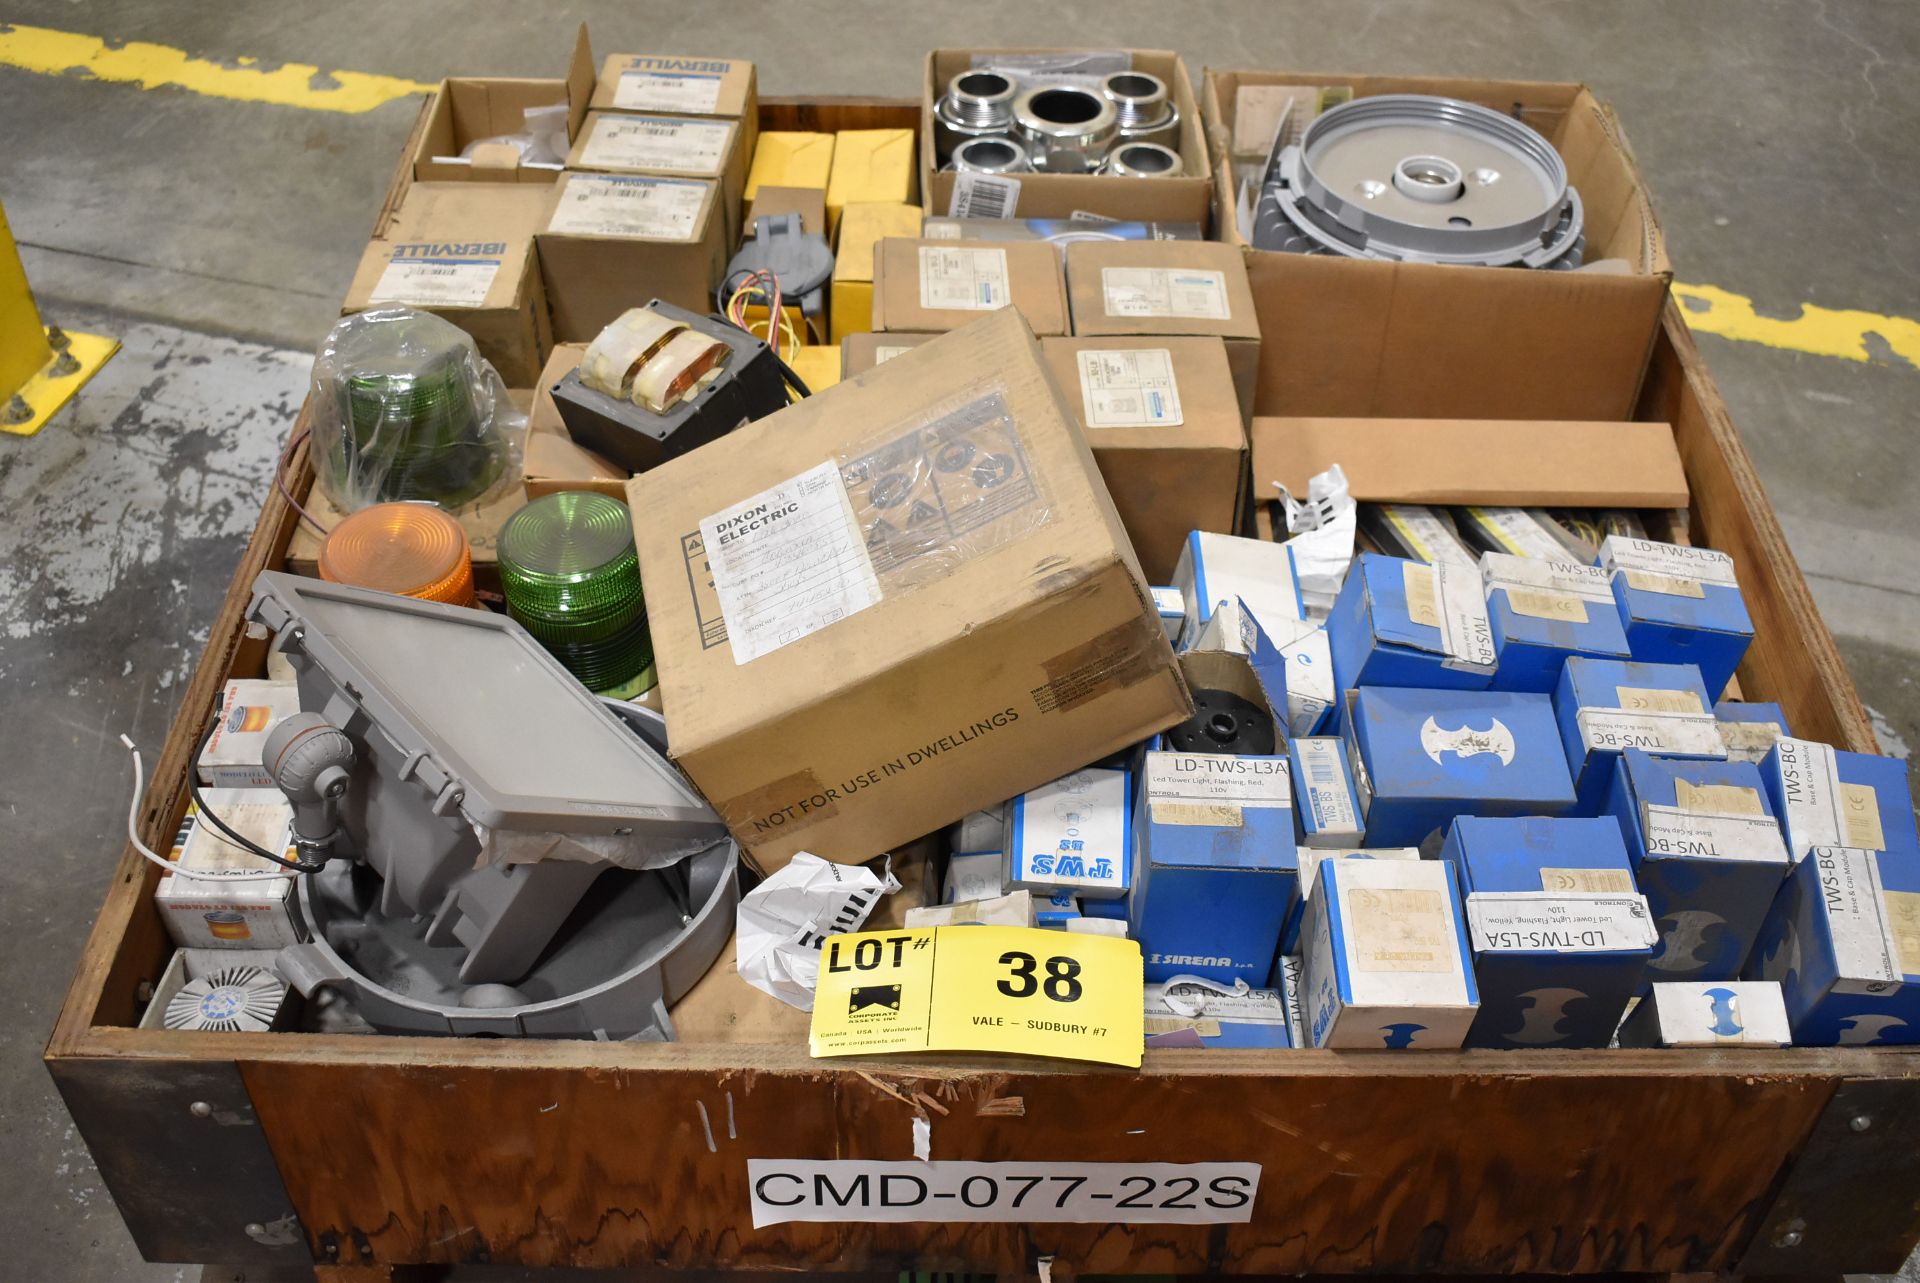 LOT/ SKID WITH ELECTRICAL EQUIPMENT & COMPONENTS - INCLUDING LIGHT FIXTURES, CONNECTORS, BALLASTS,